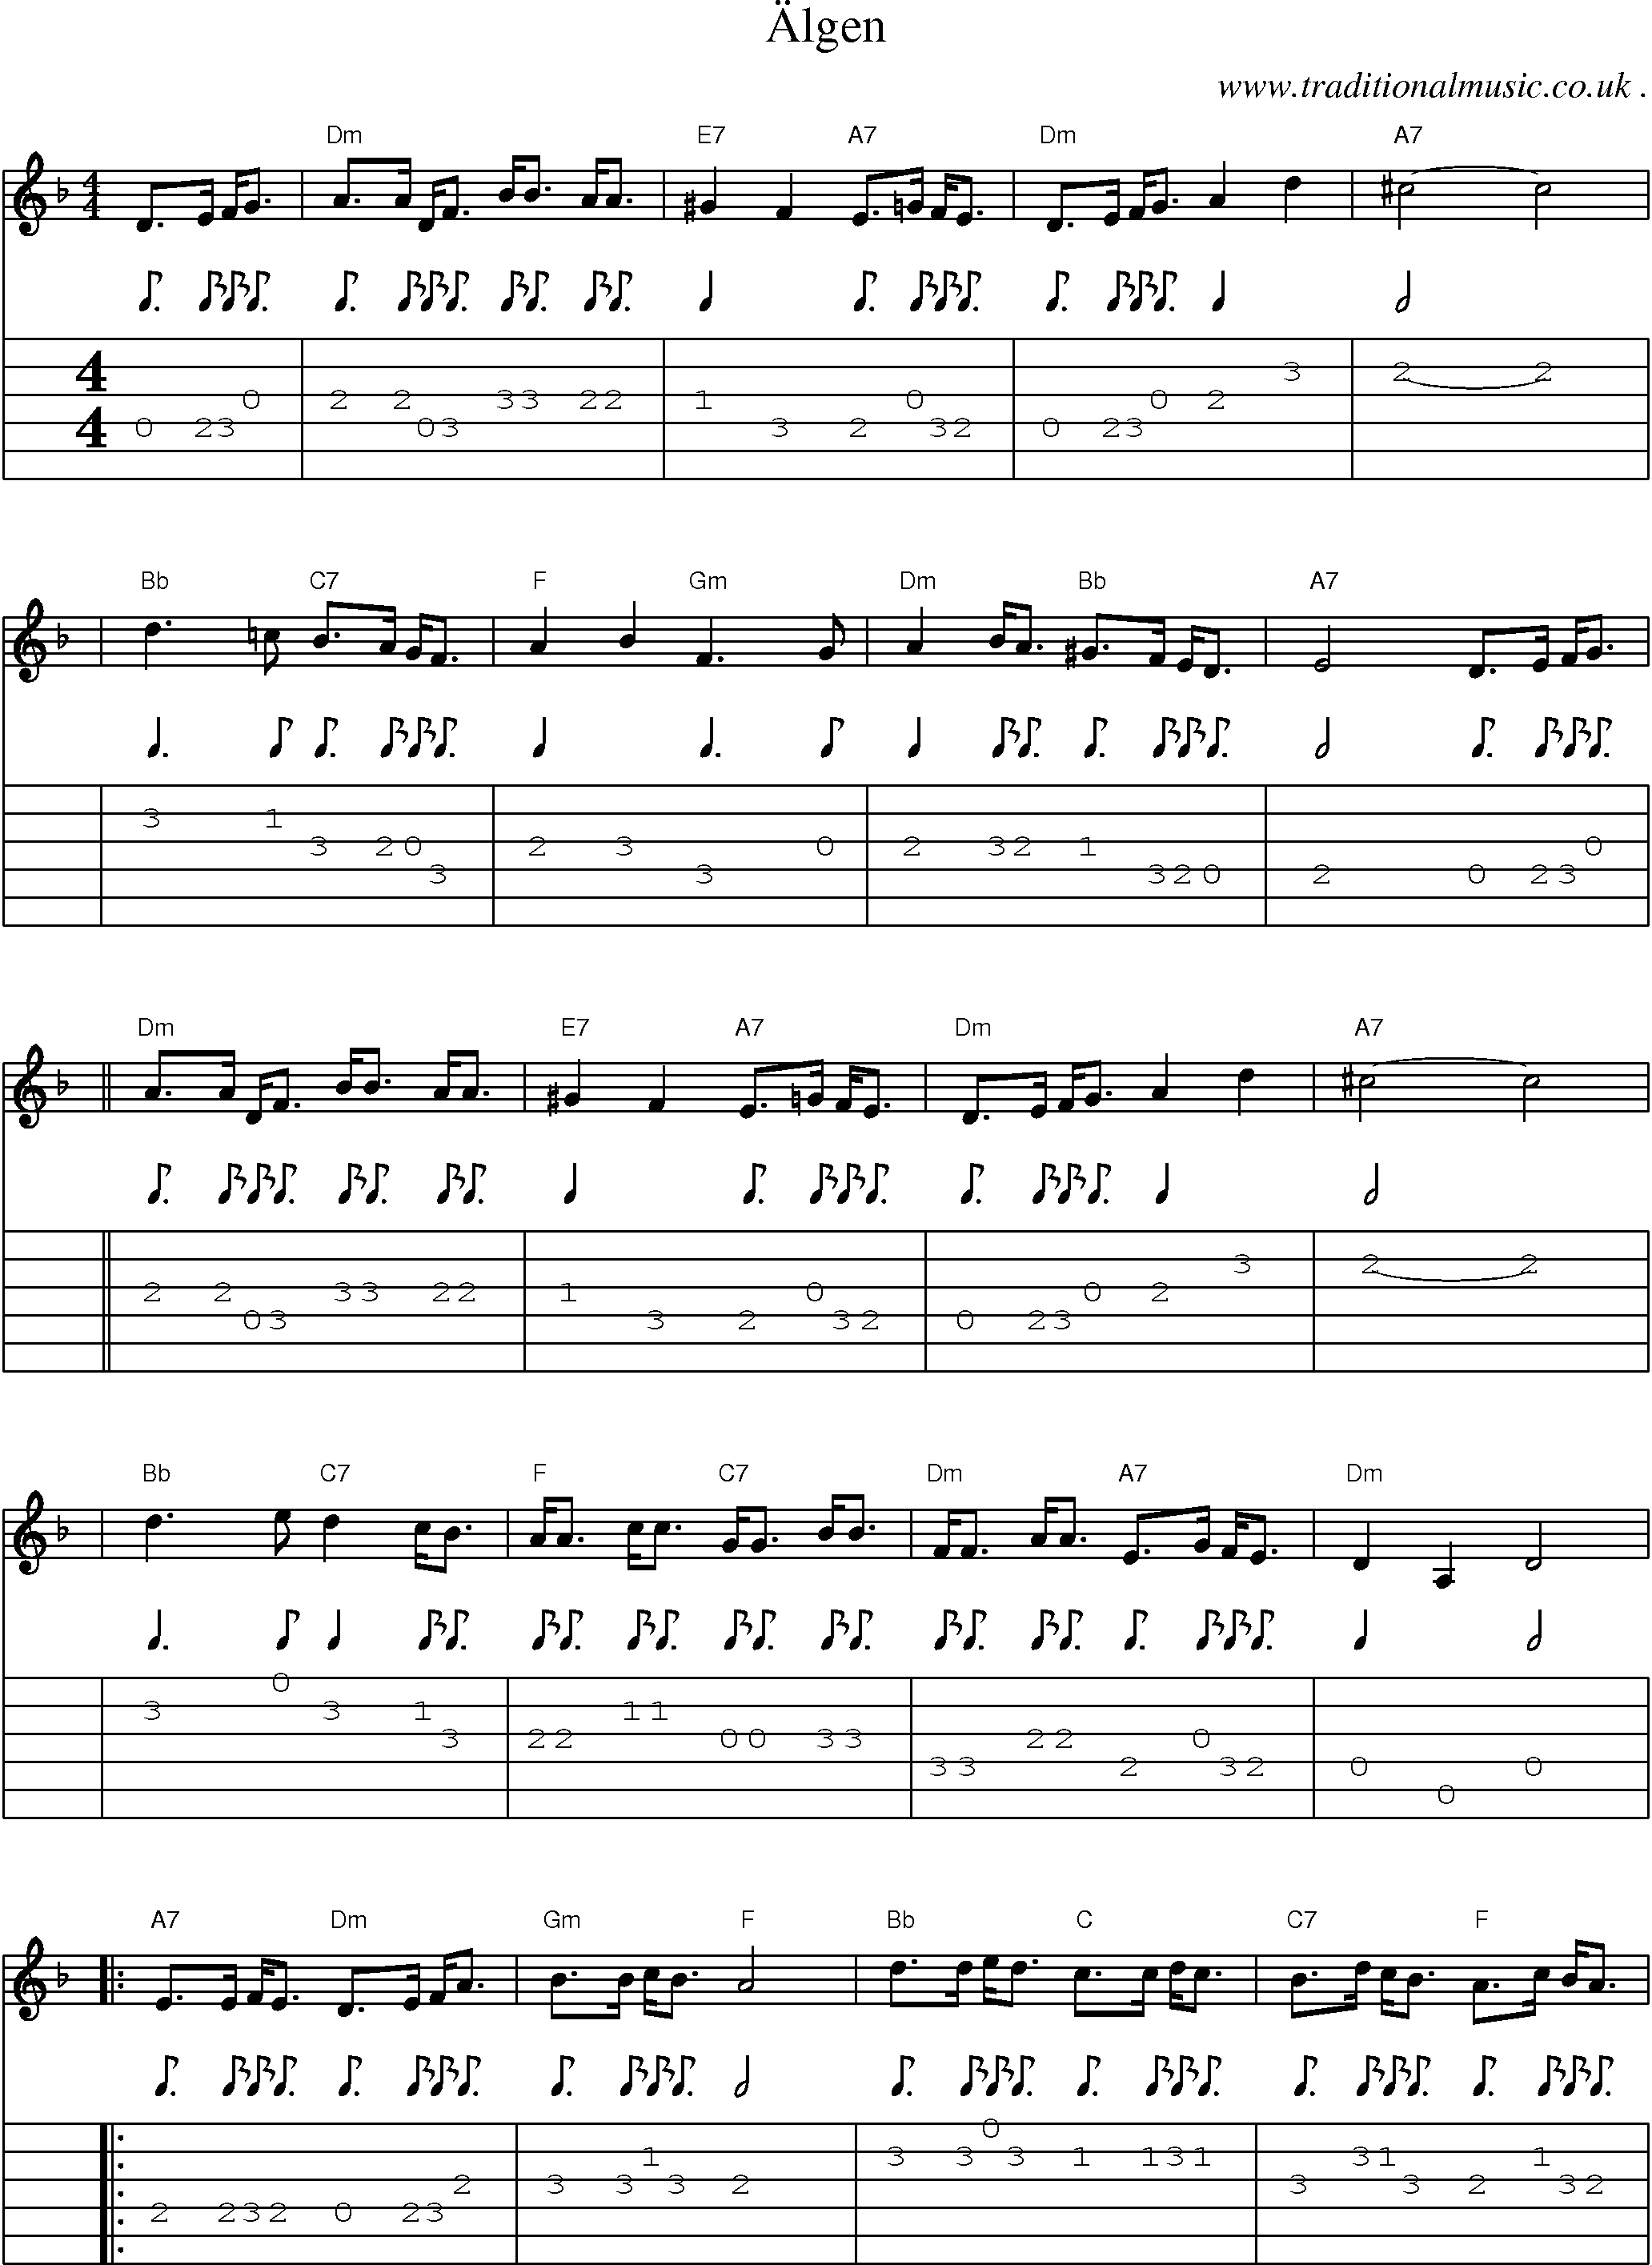 Sheet-music  score, Chords and Guitar Tabs for Algen